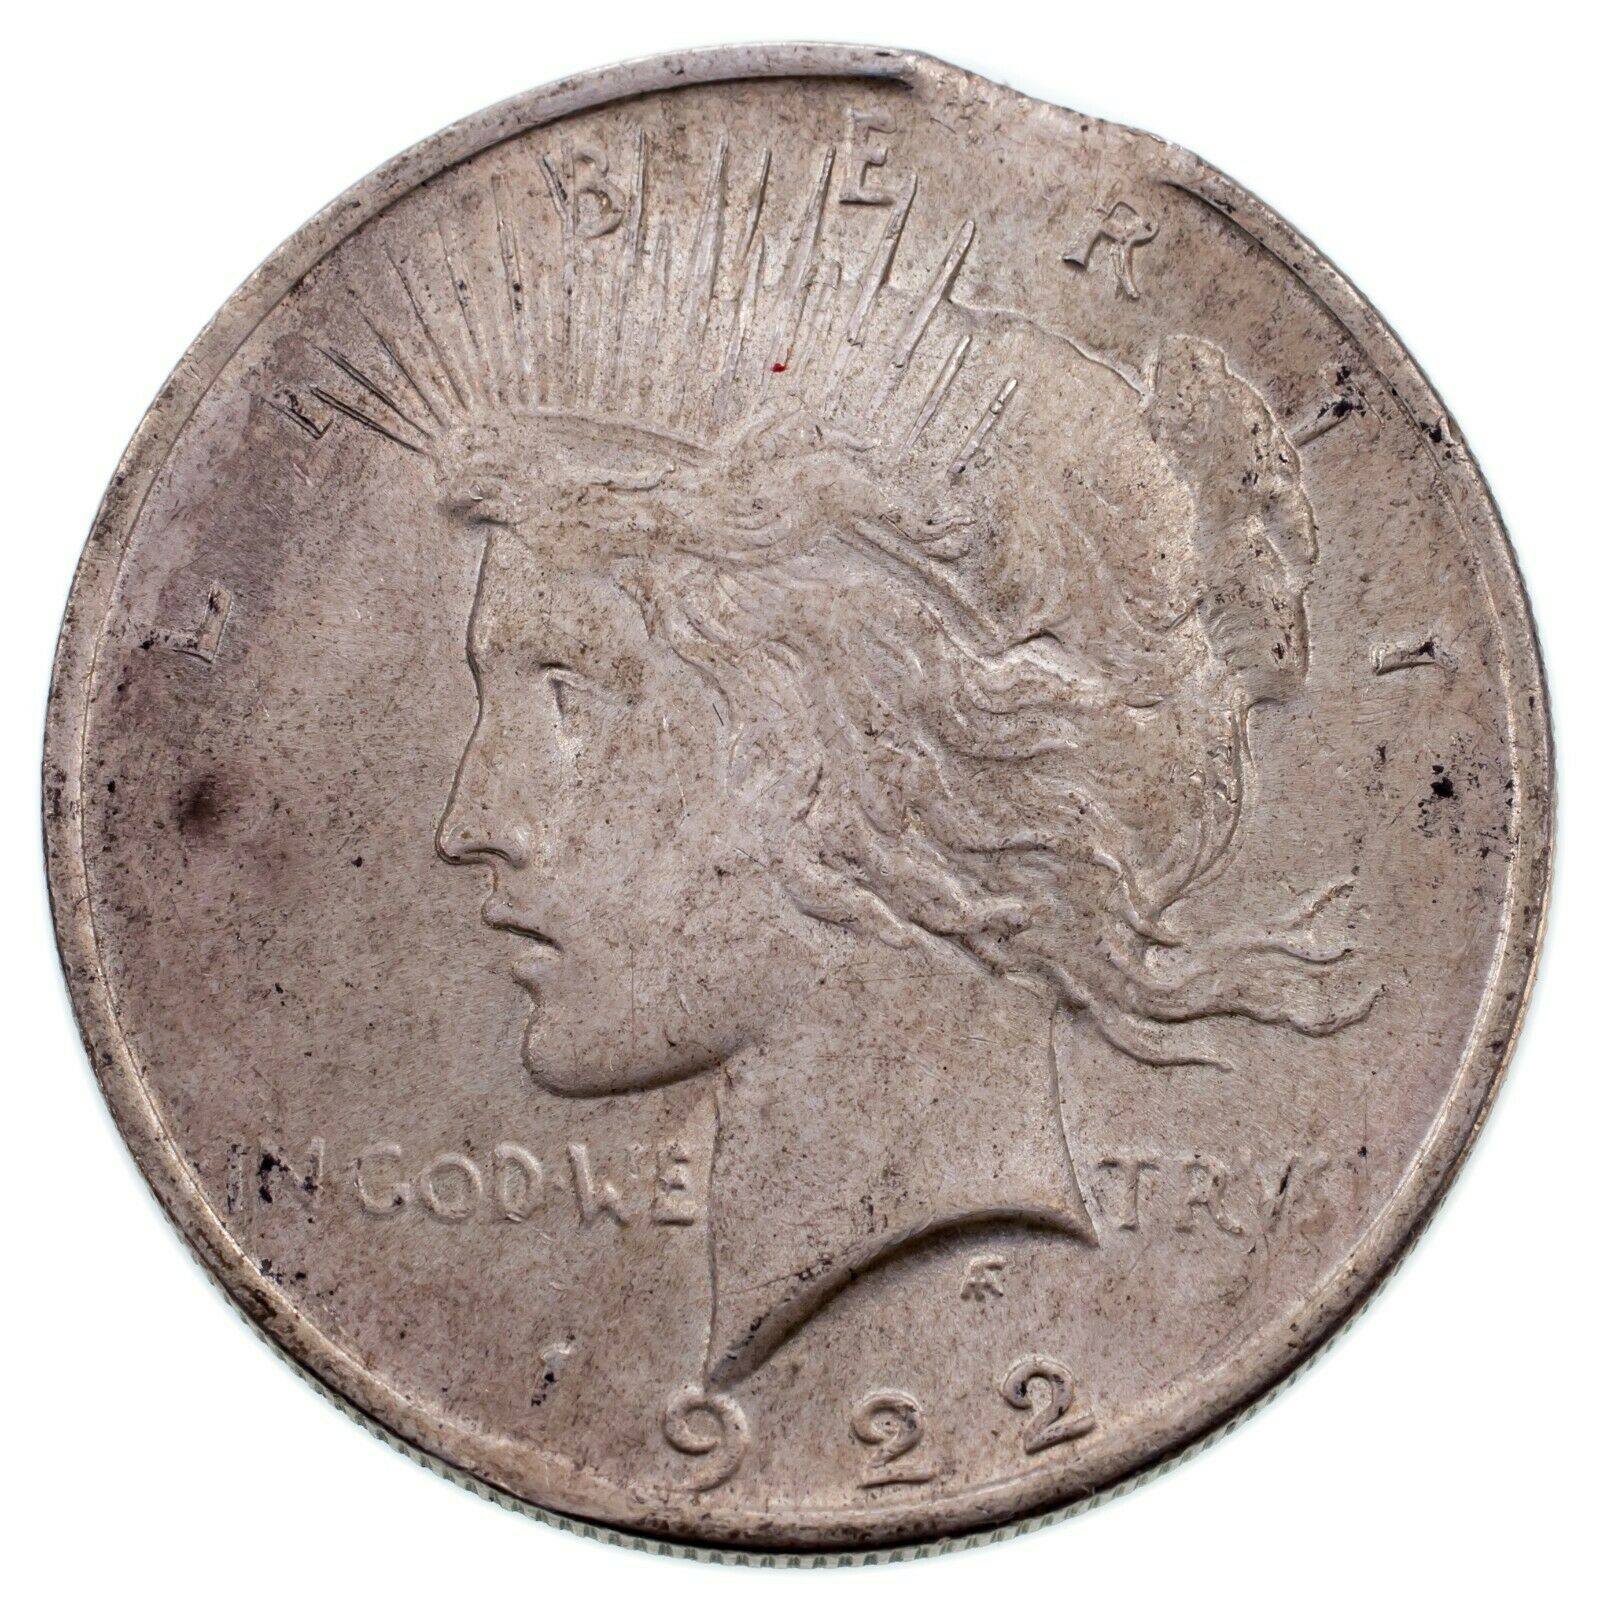 1922 $1 Silver Peace Dollar "Clipped" Variety in Ch BU Condition, Clip at 1:00 - $83.15